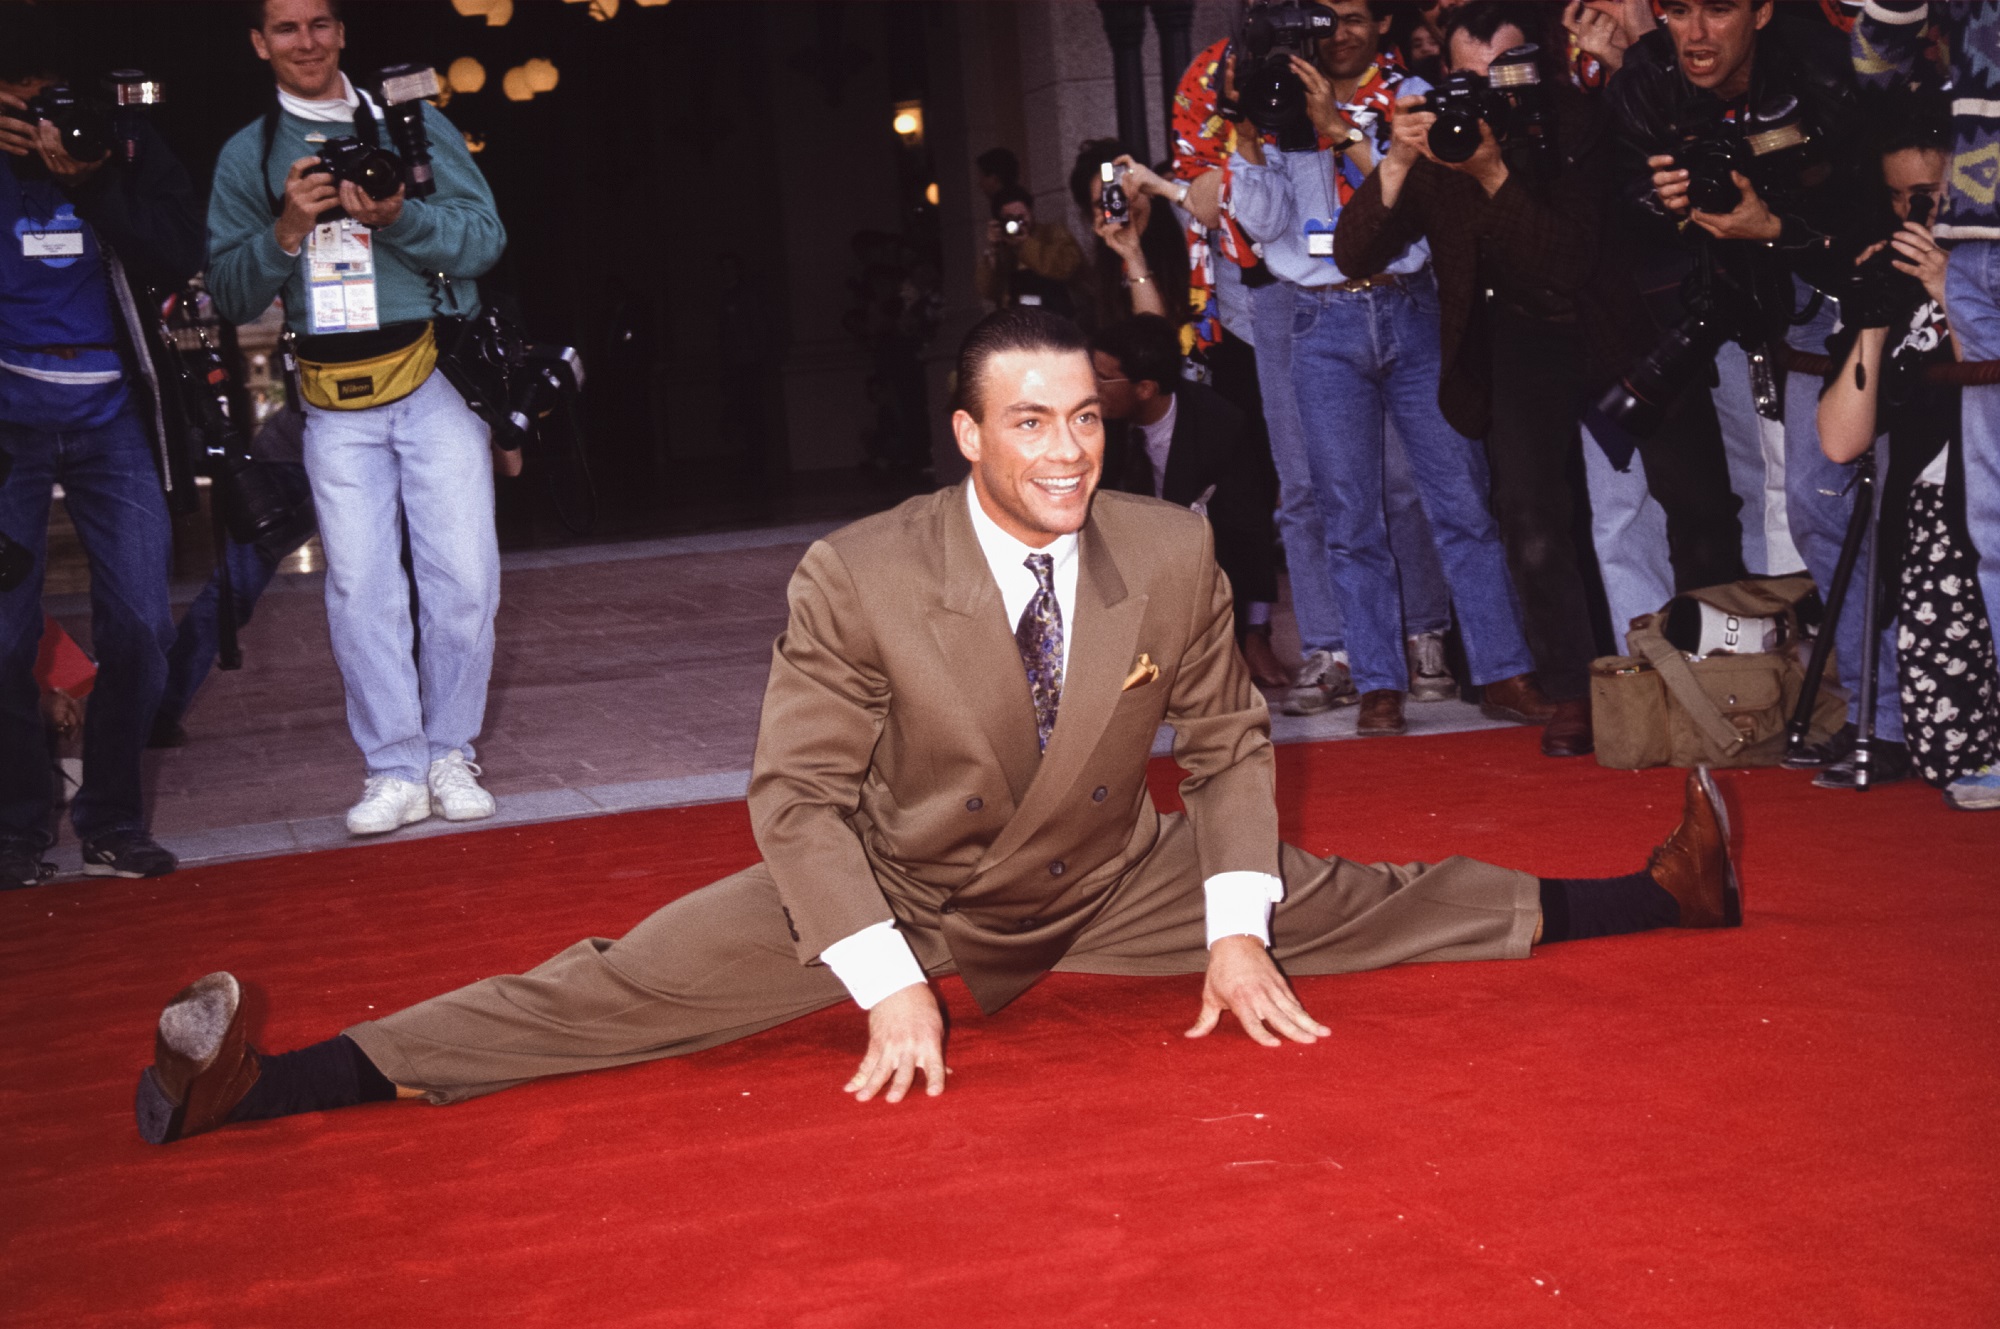 Jean-Claude Van Damme does a split on the red carpet